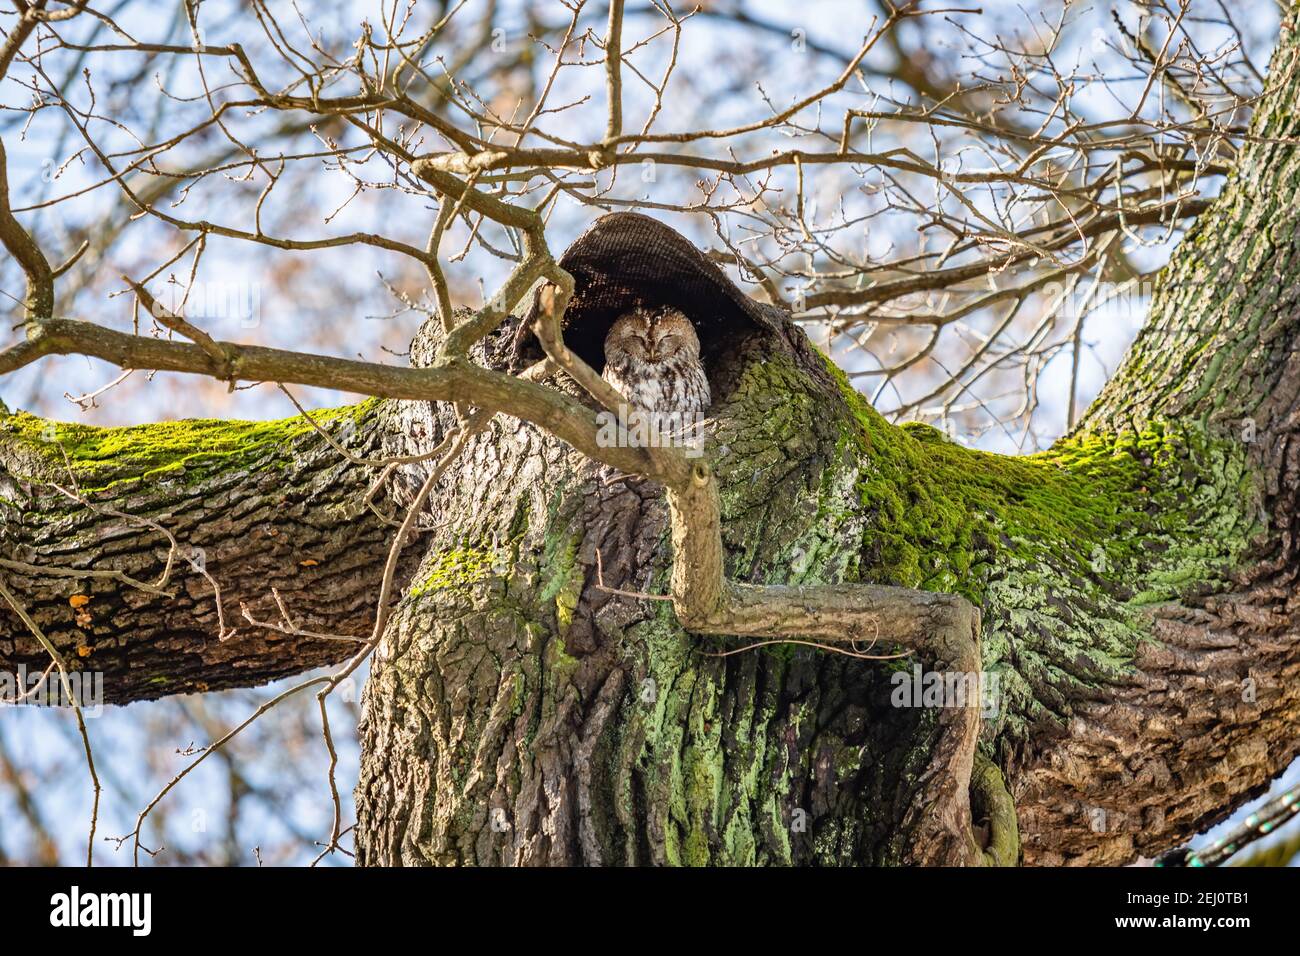 A small tawny owl, Strix aluco, sitting on the top of an oak tree with brown and green bark hiding underneath a roof. Sunny winter day with blue sky. Stock Photo